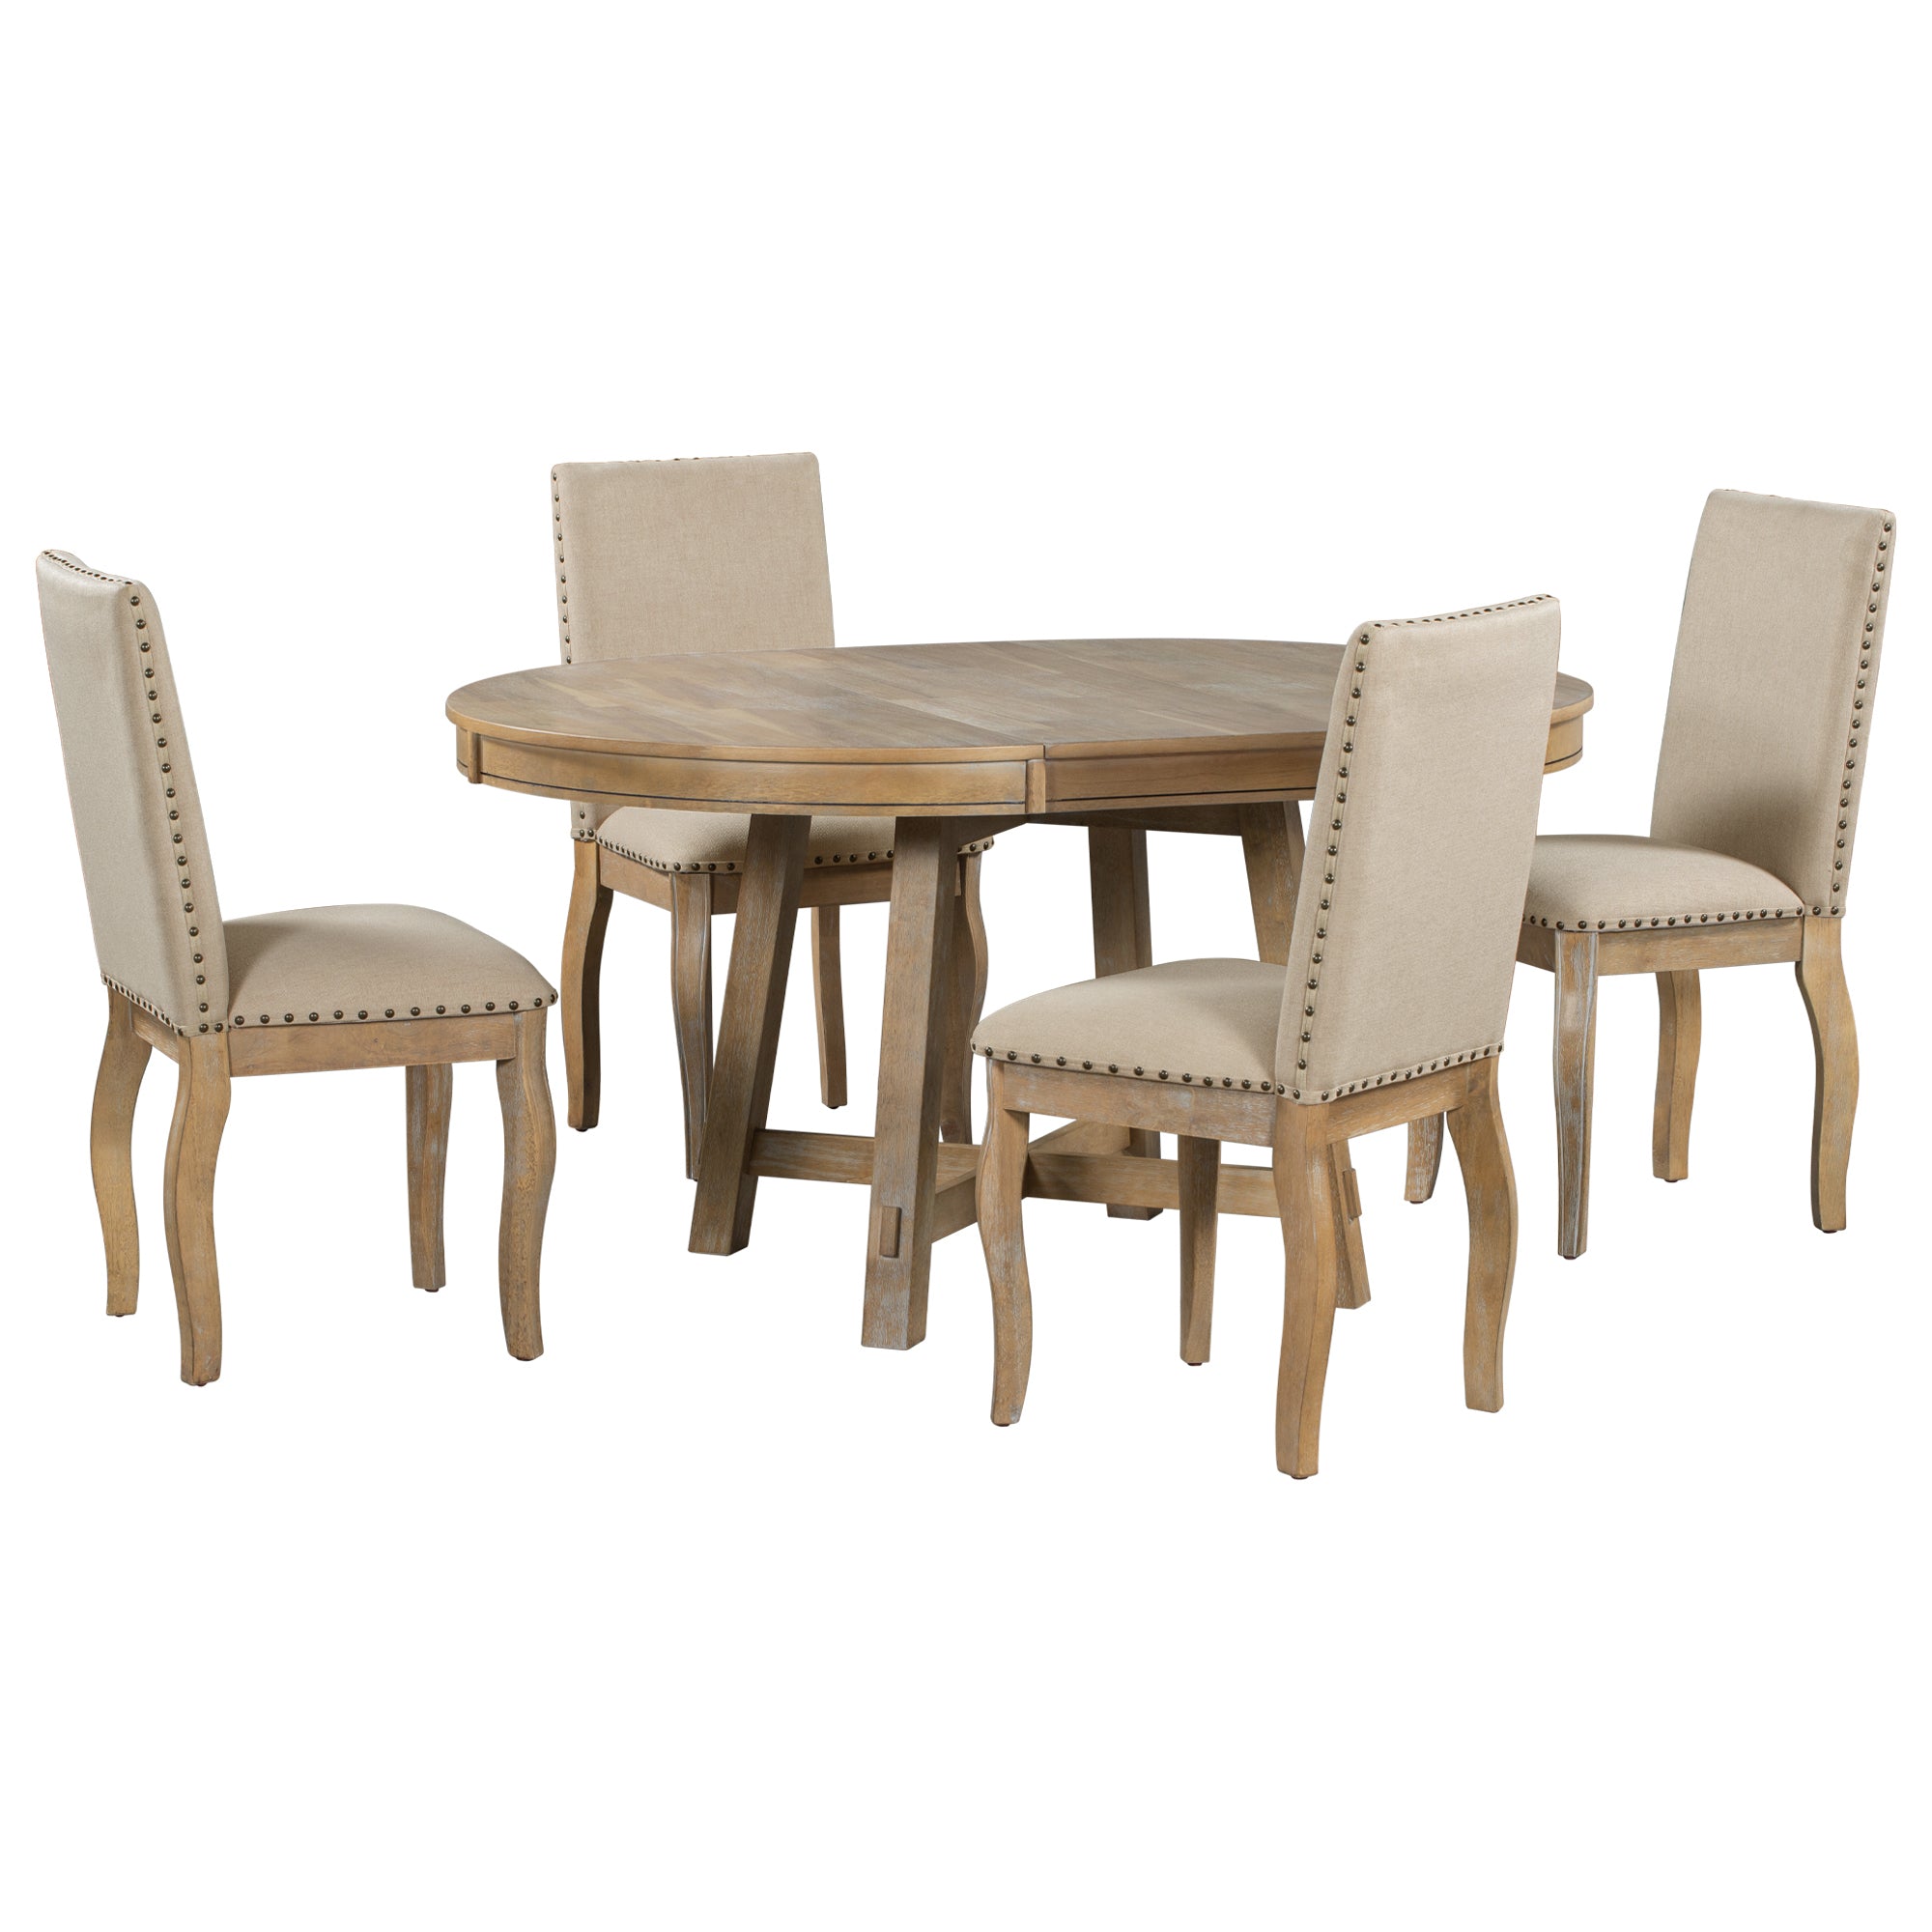 Harrison 5Pc Set Natural Wood Wash Dining Set with Dropleaf. 42" Round Extend to 58" Oval